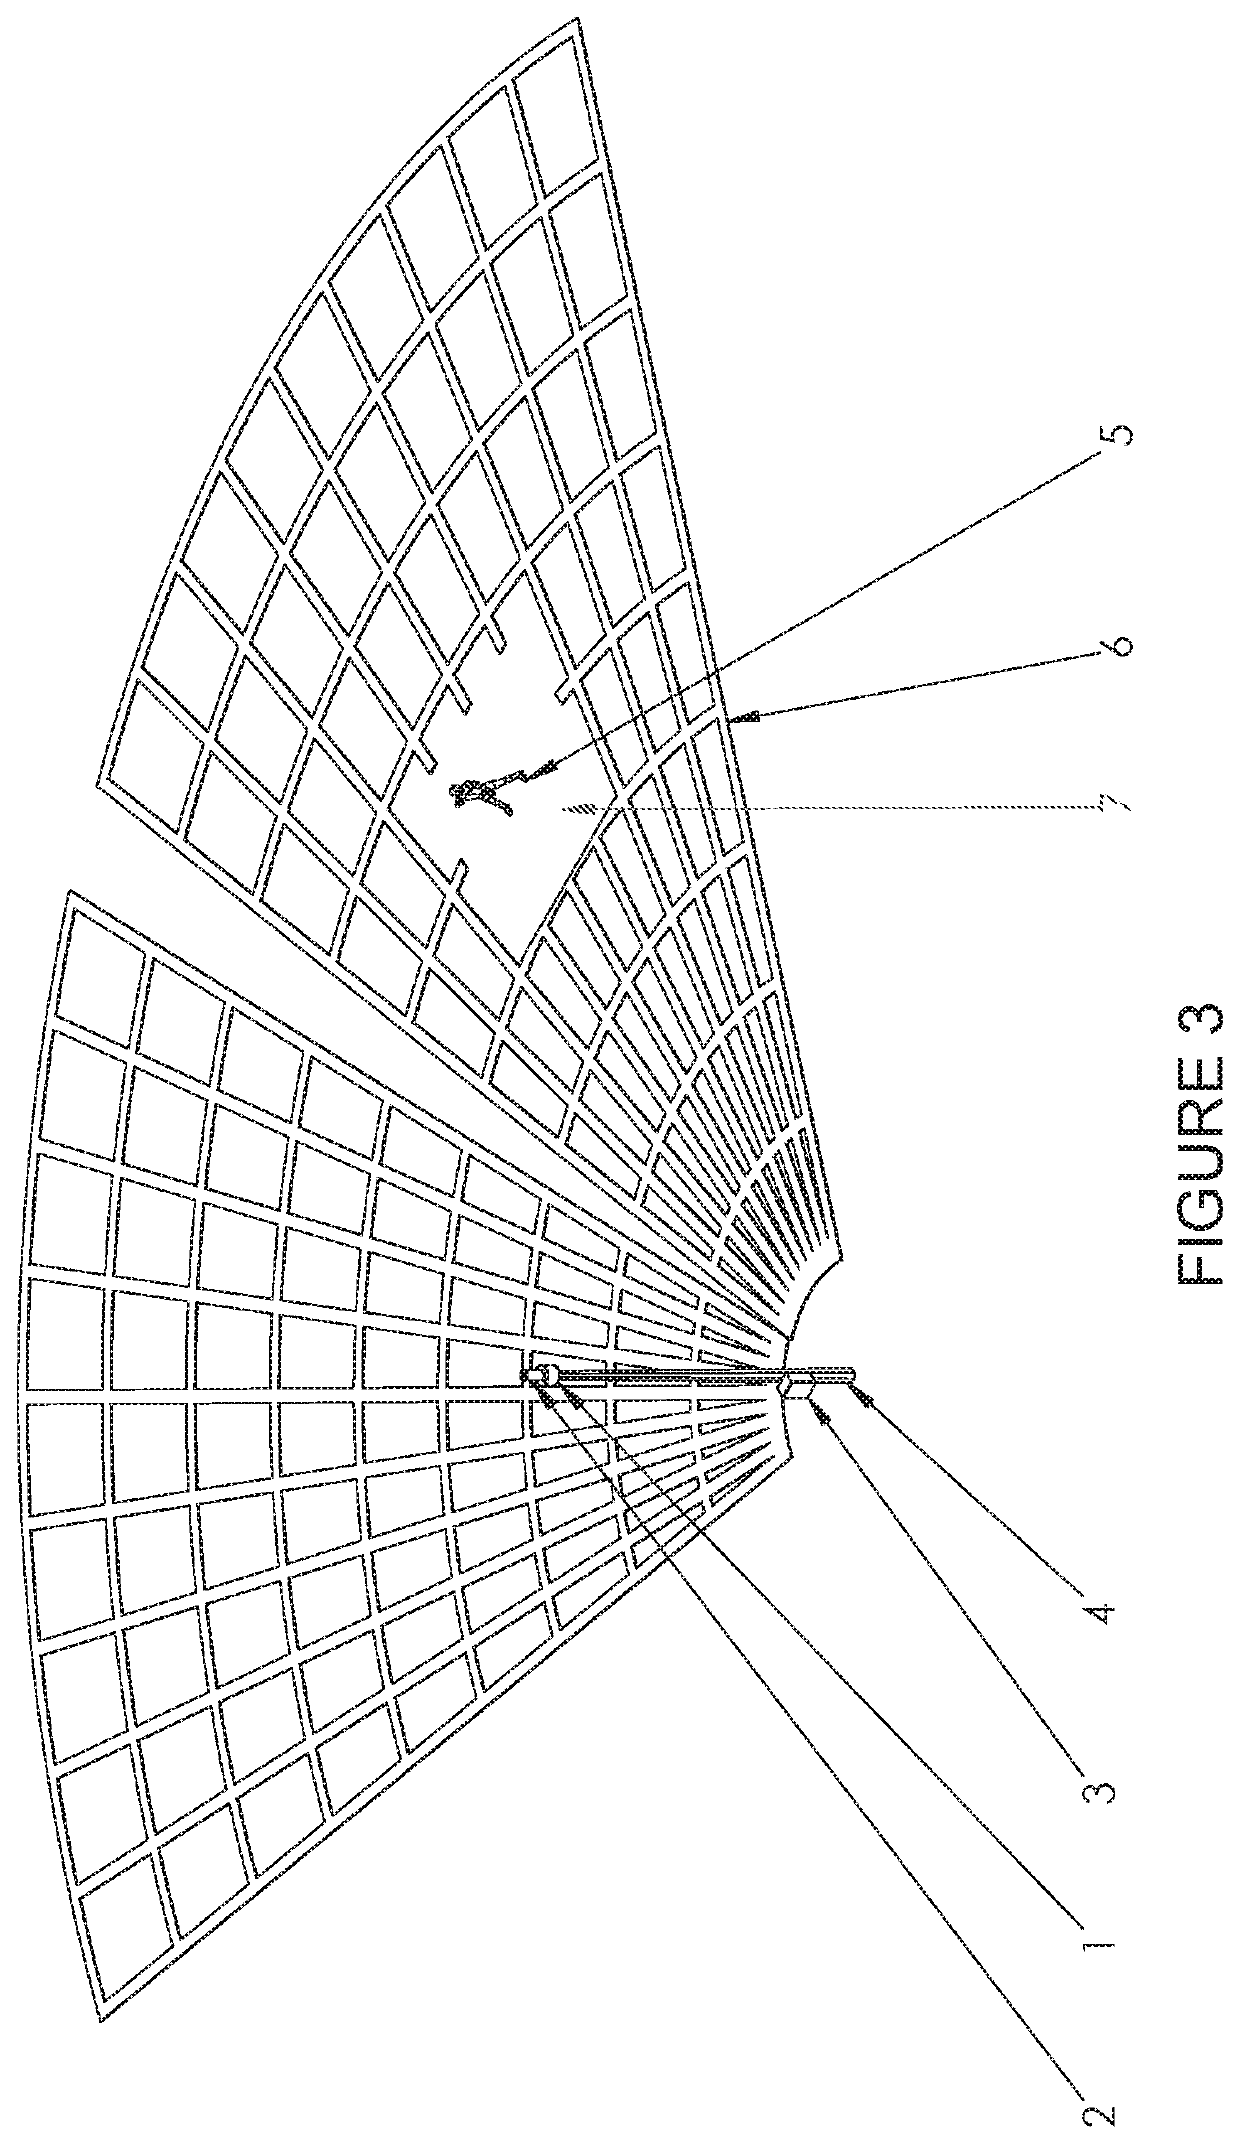 System for interactively projecting geometrically accurate light images into a projection environment or zone of complex three-dimensional topography